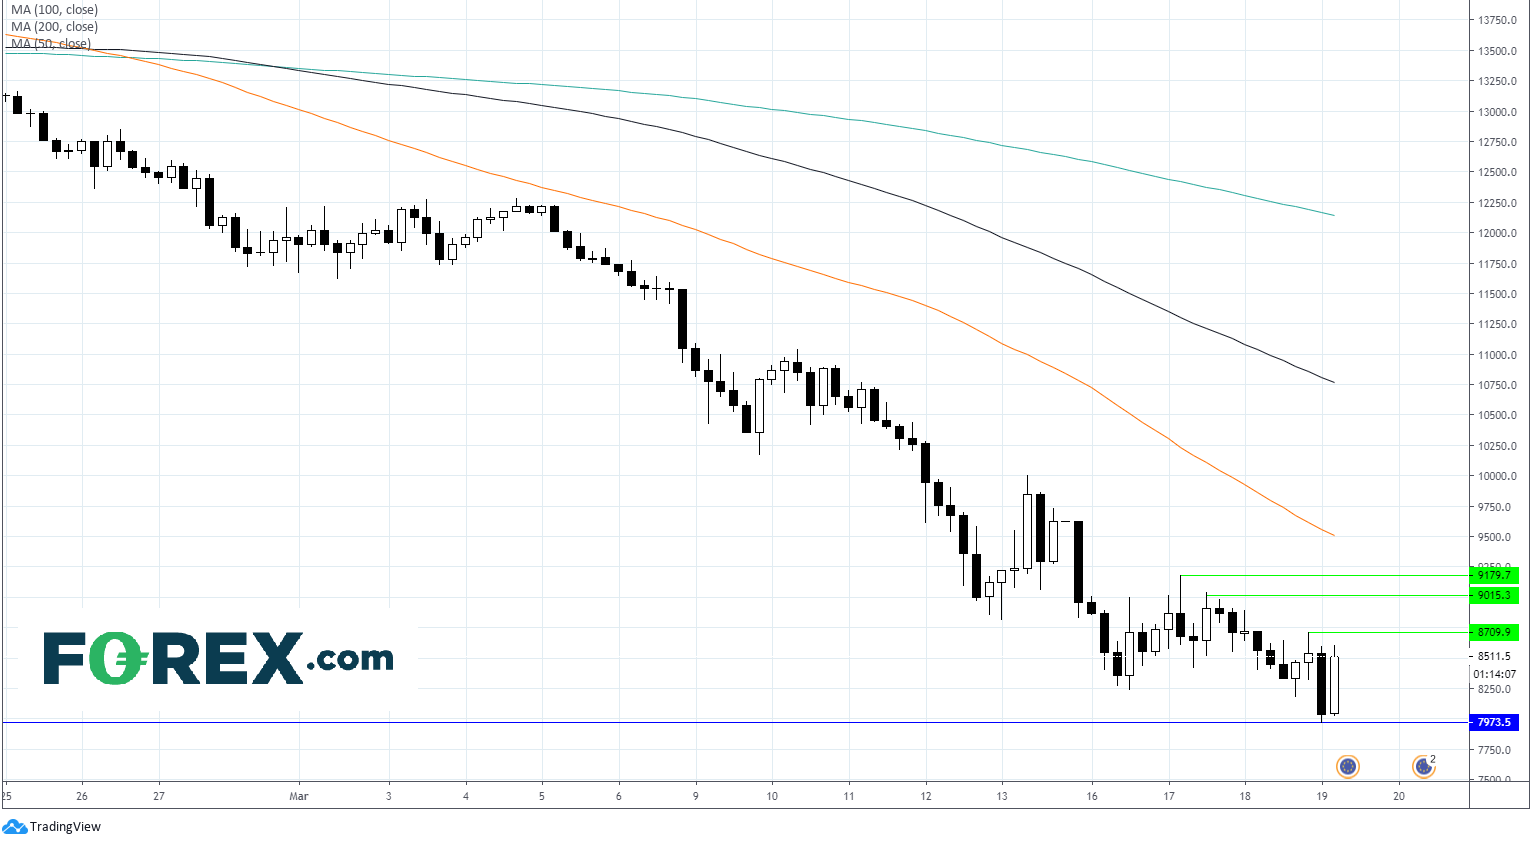 Chart analysis demonstrating how Dax Stabilising As Traders Asses Global Stimulus. Published in March 2020 by FOREX.com